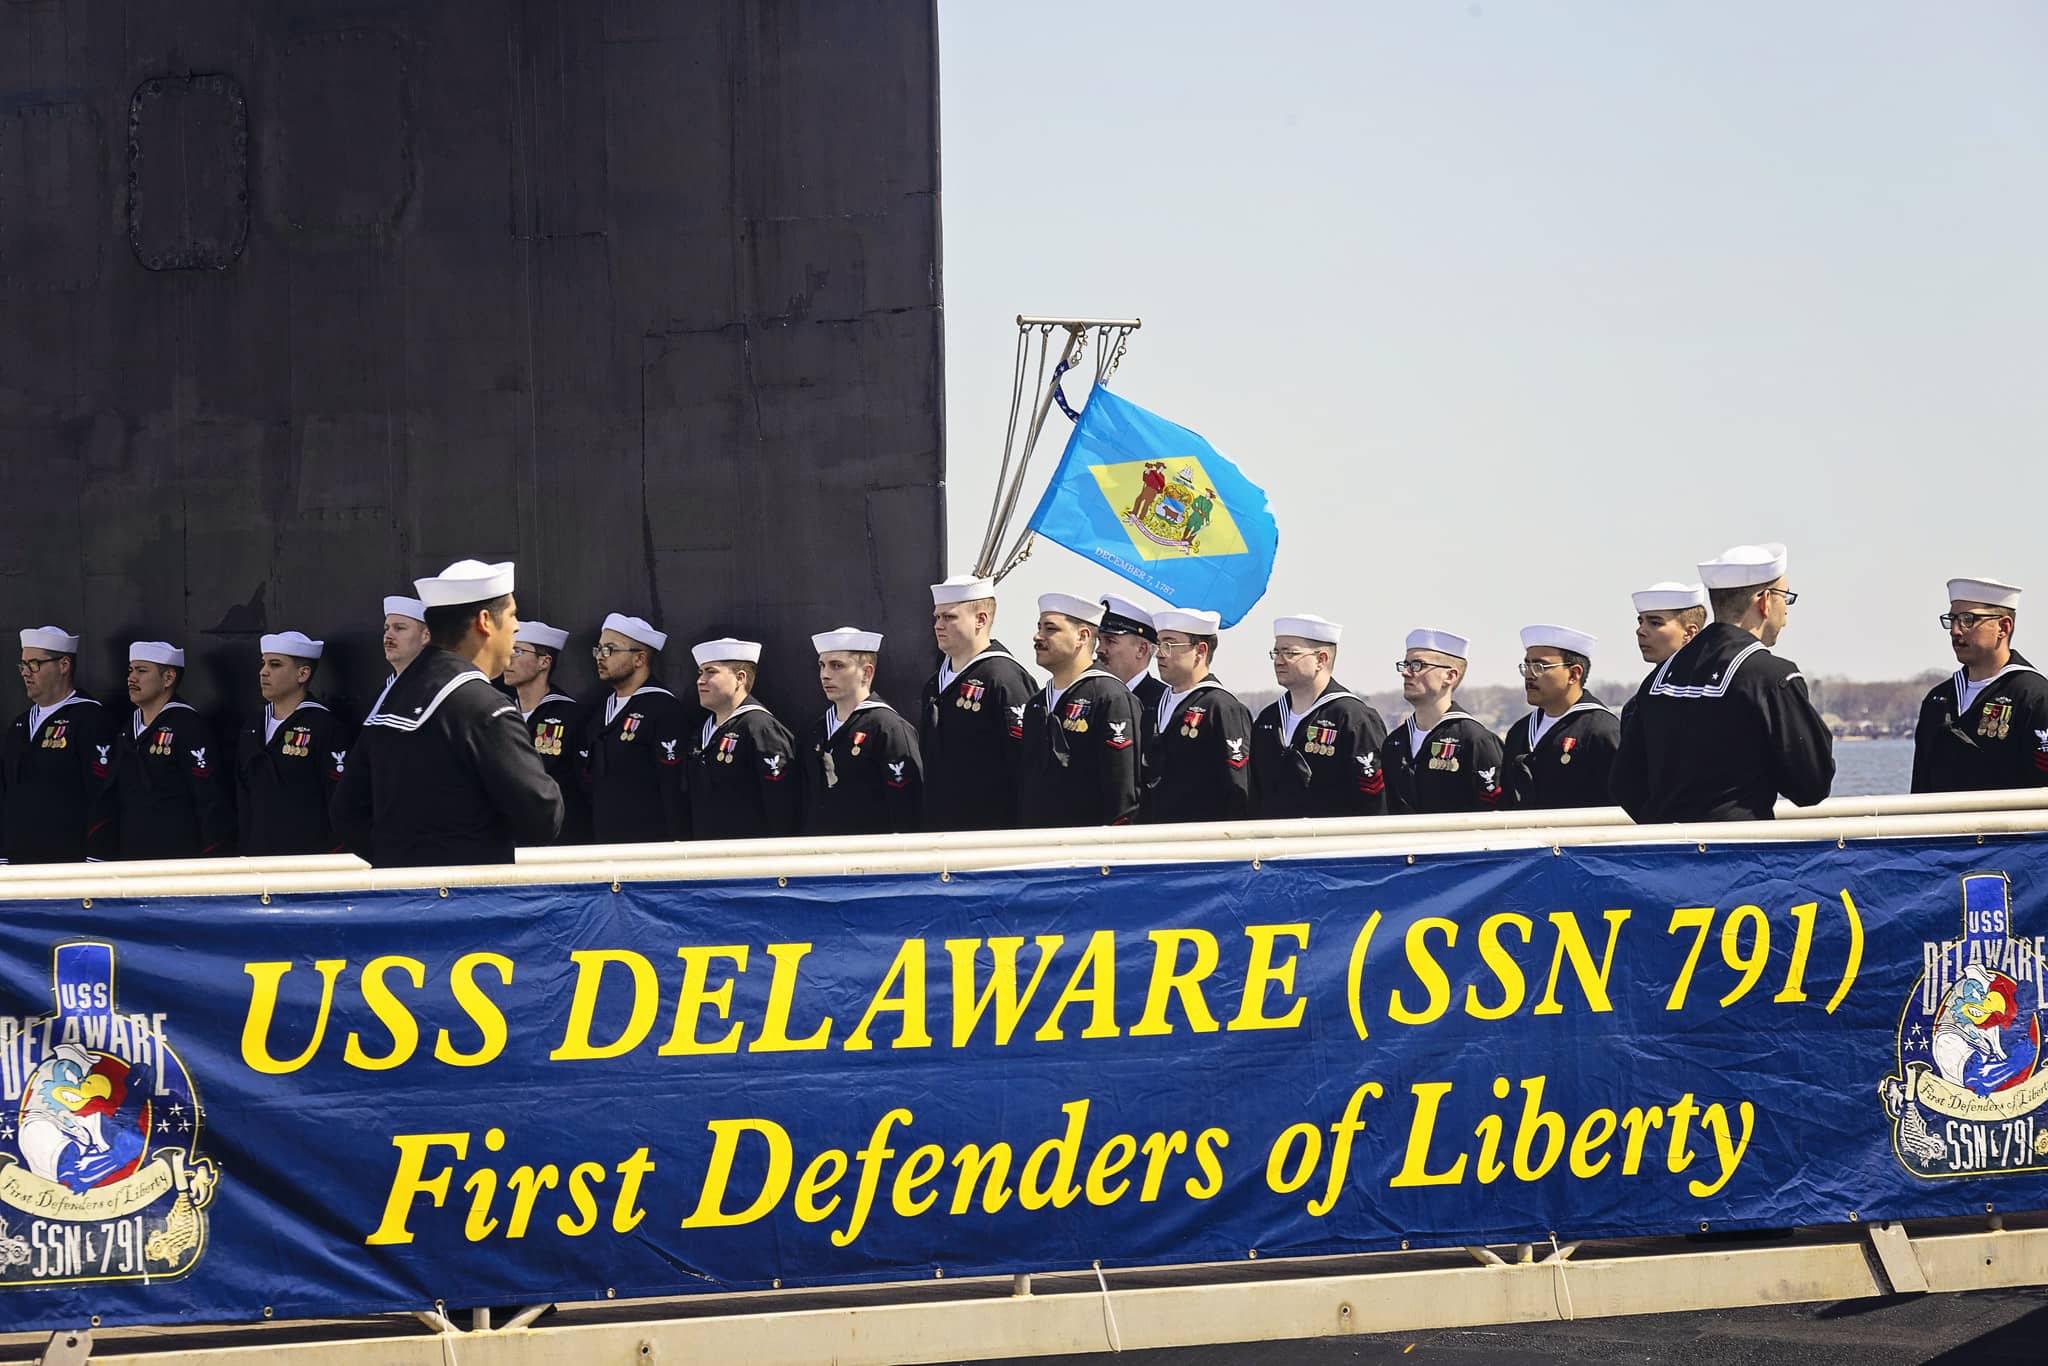 Members of the USS Delaware stand on the submarine during the Ceremonial Commissioning Ceremony